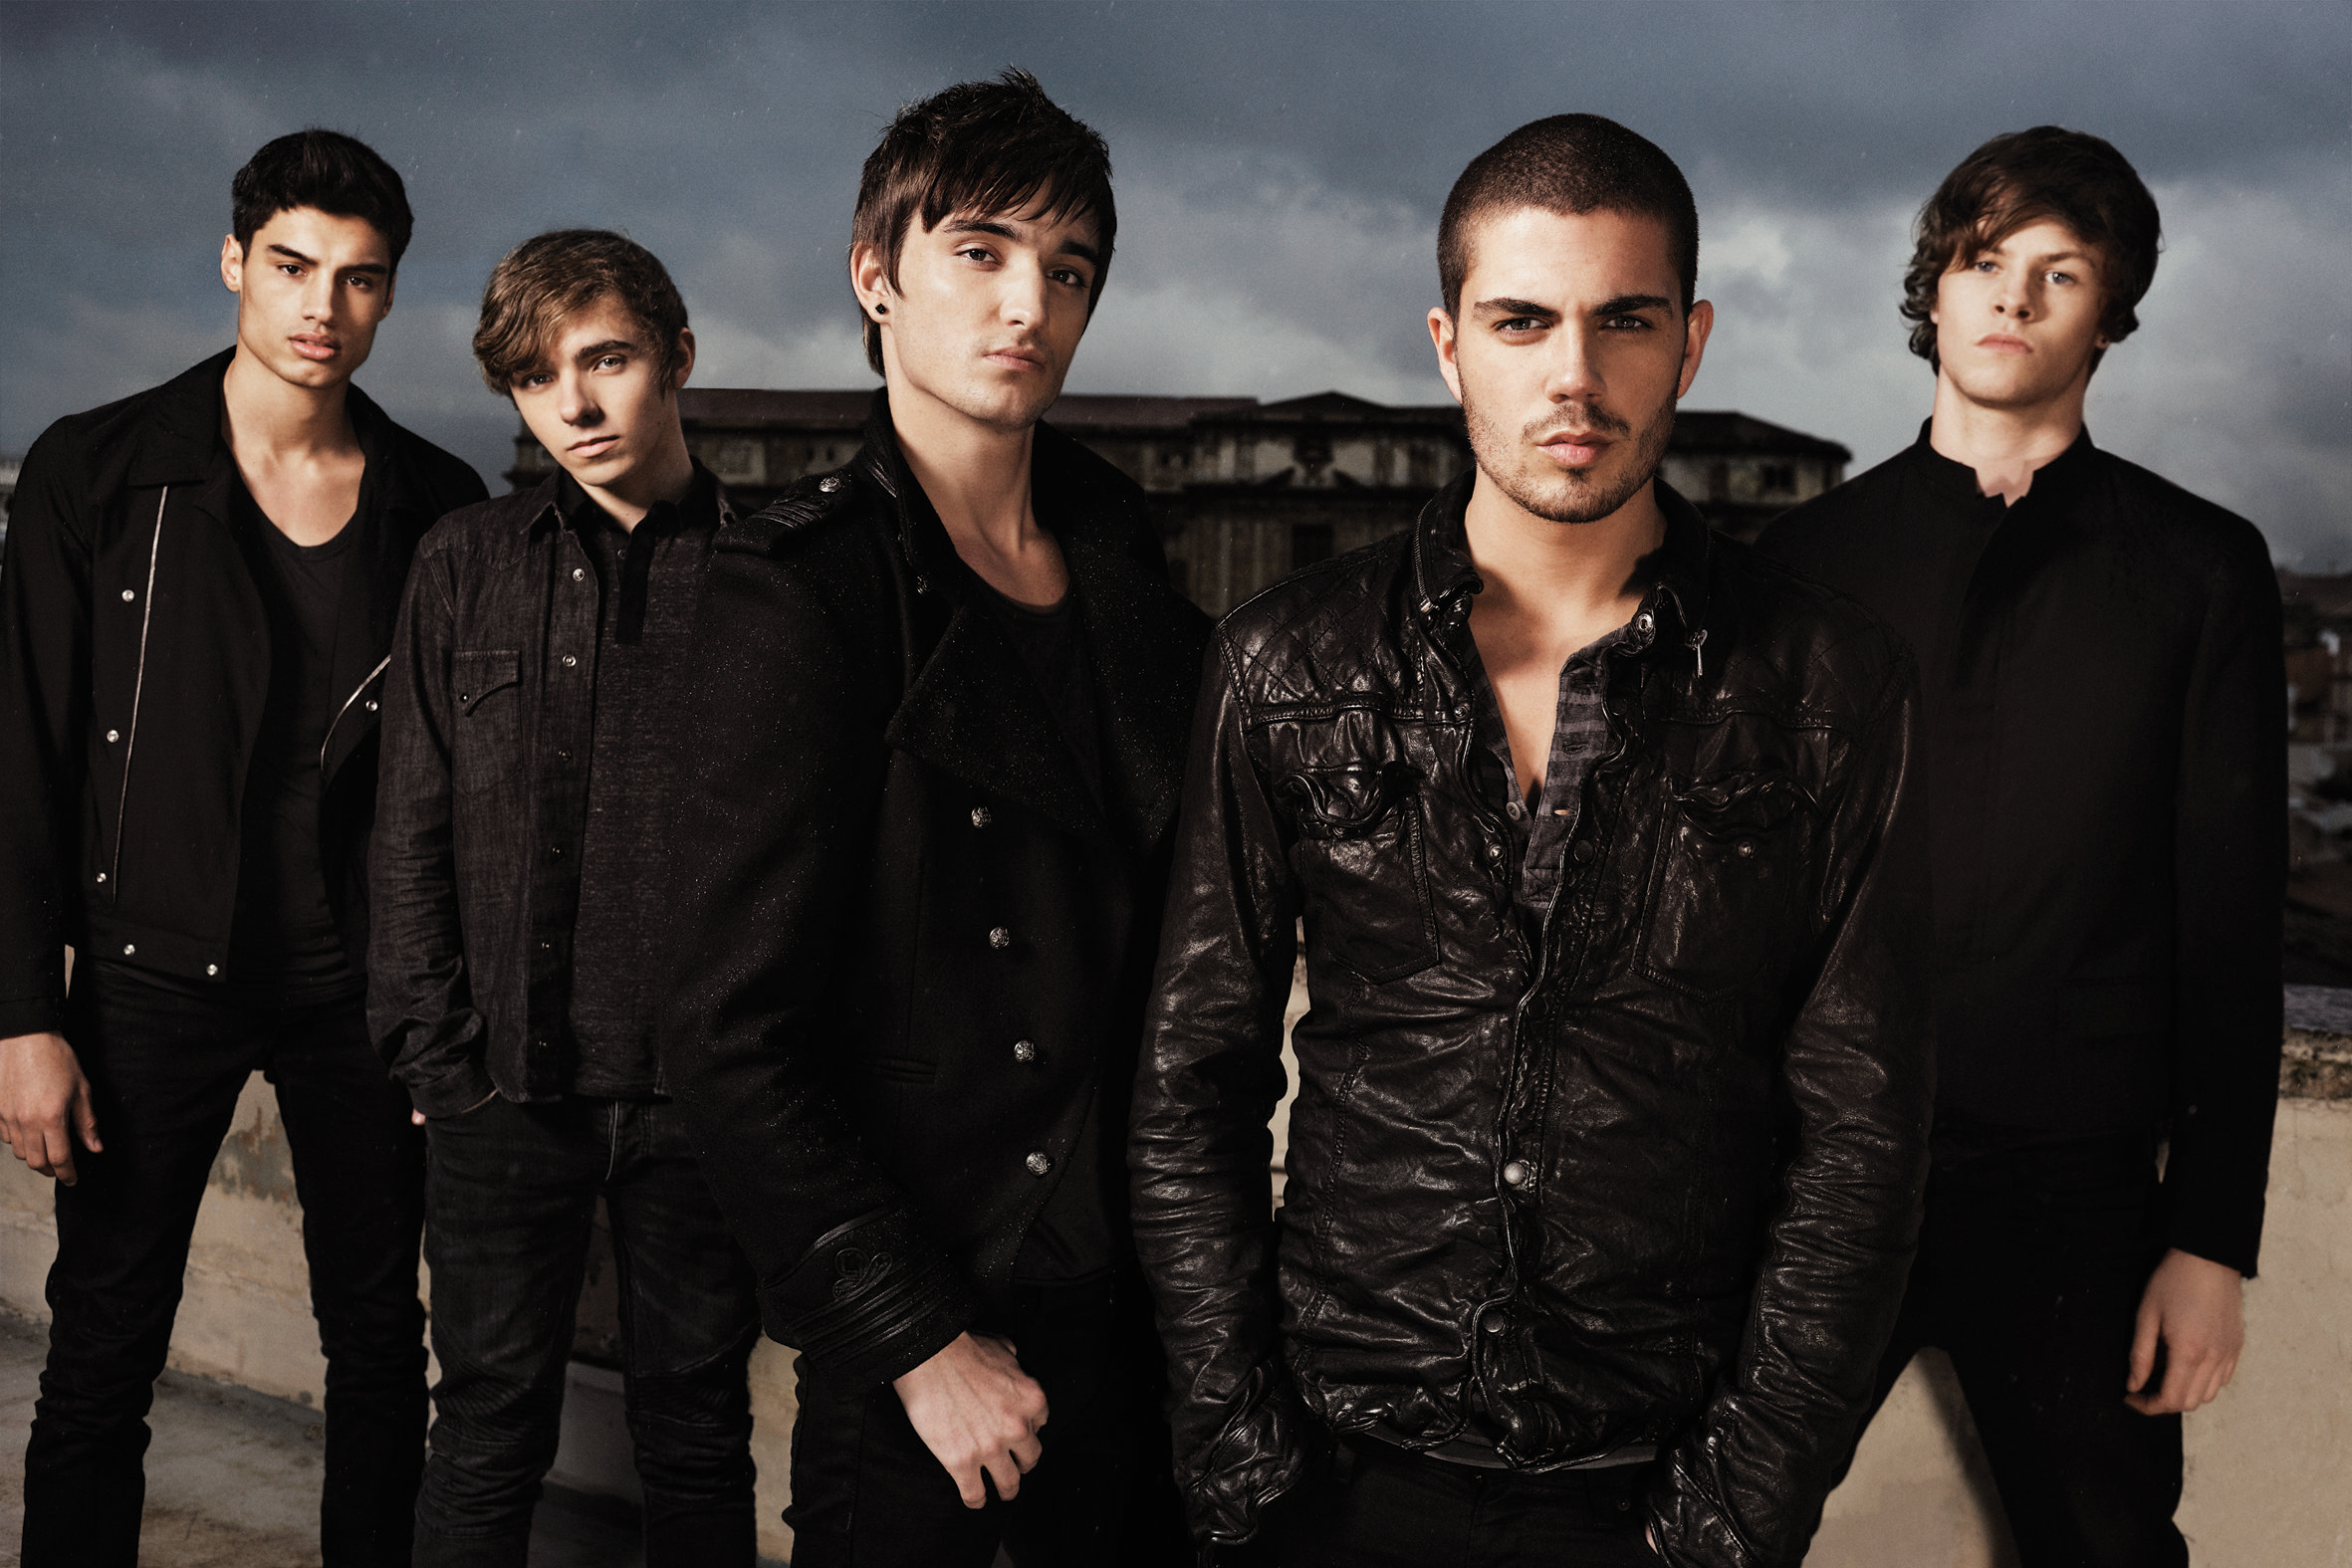 The. Группа the wanted. Want. Группа the wanted 2019. Wanted 2009.